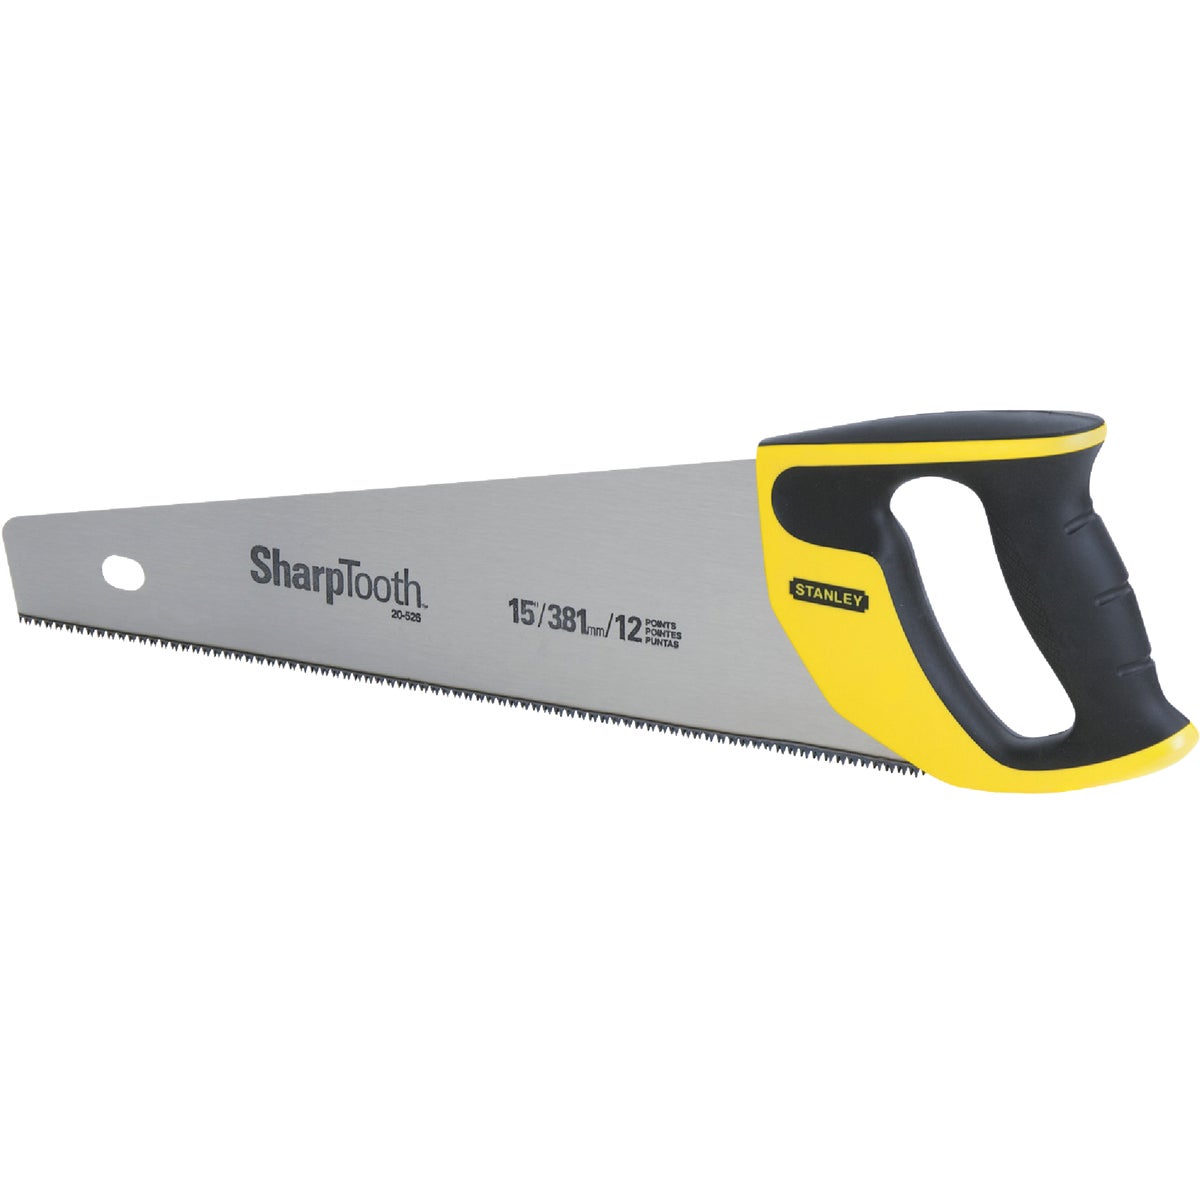 Item 396060, Uses 3 cutting surfaces to cut faster than conventional Stanley hand saws.